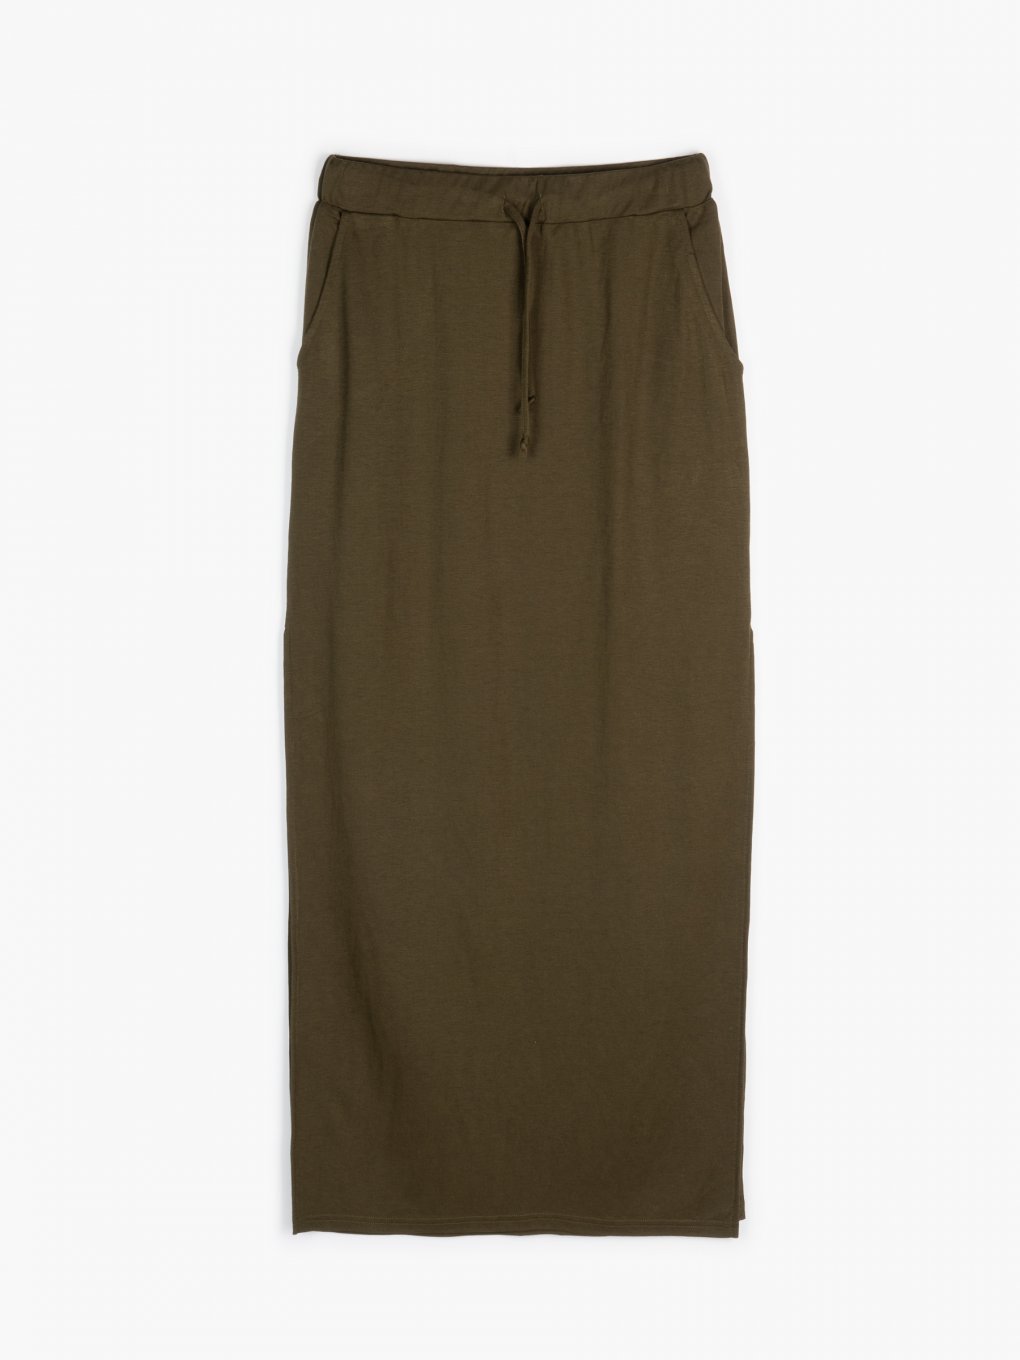 Maxi skirt with side slits